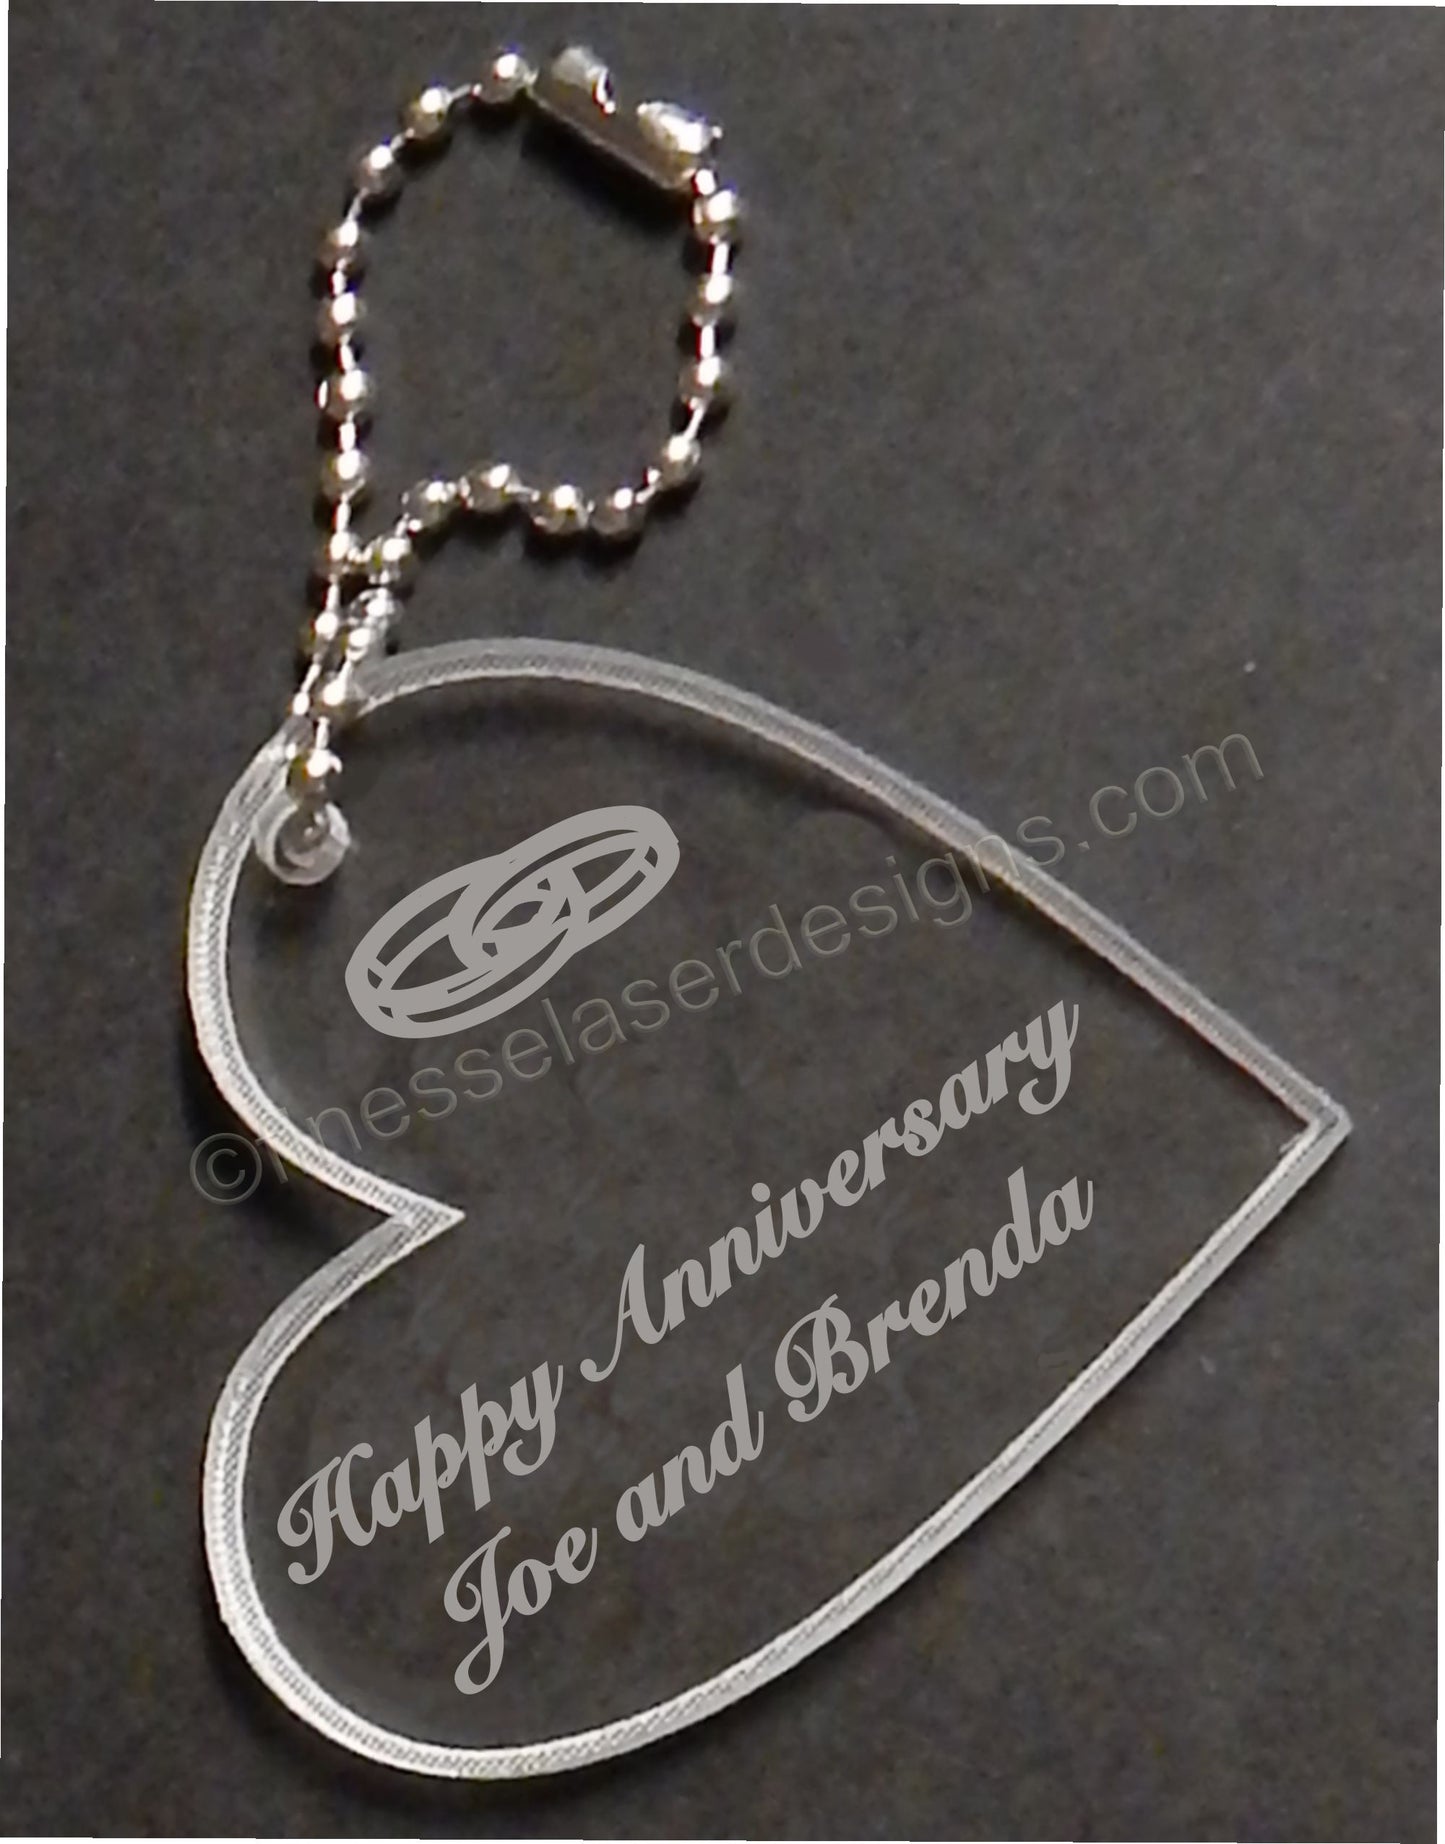 heart shaped keychain favor designed with wedding rings and engraved with Happy Anniversary and names, with small metal chain attached